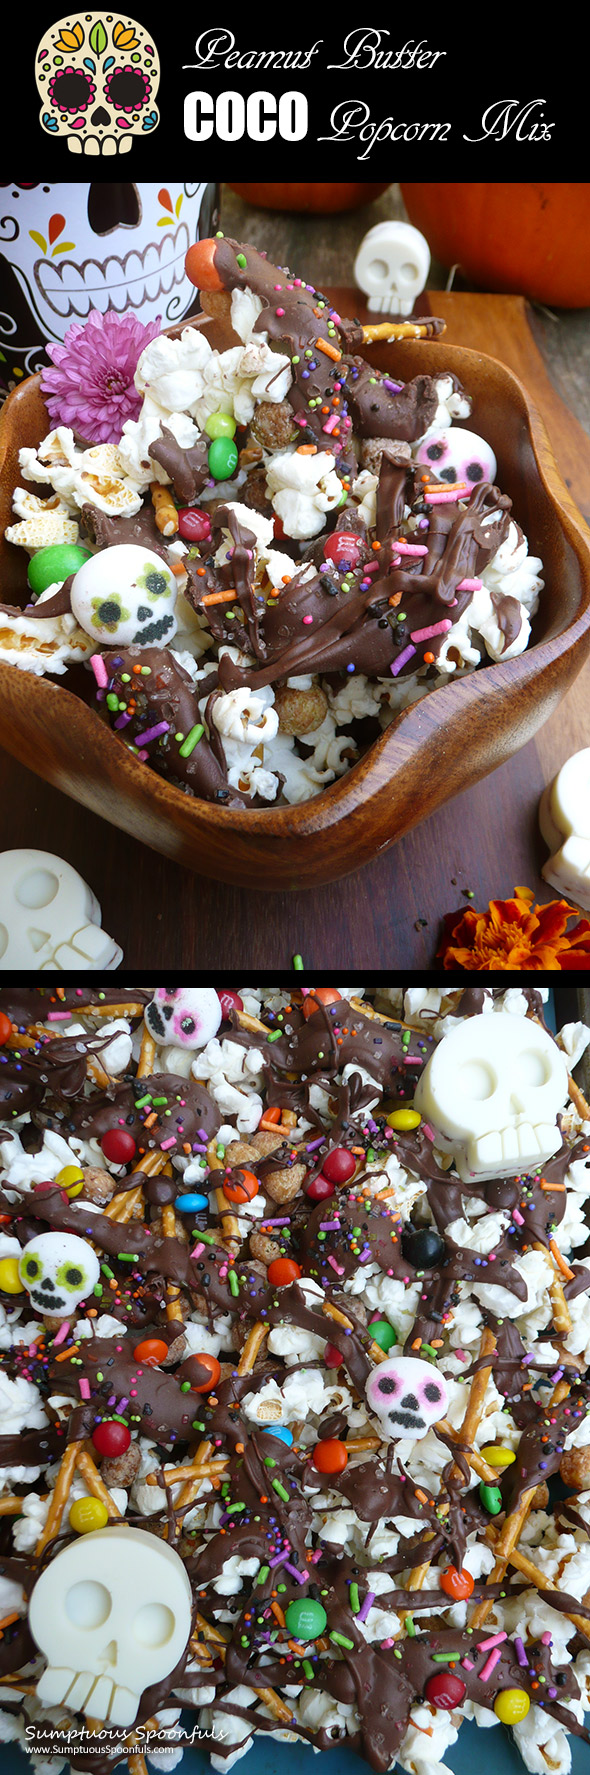 Peanut Butter COCO Popcorn Mix ~ perfect for snacking on while watching the movie COCO! A delicious peanut buttery chocolate popcorn mix that's totally addictive!